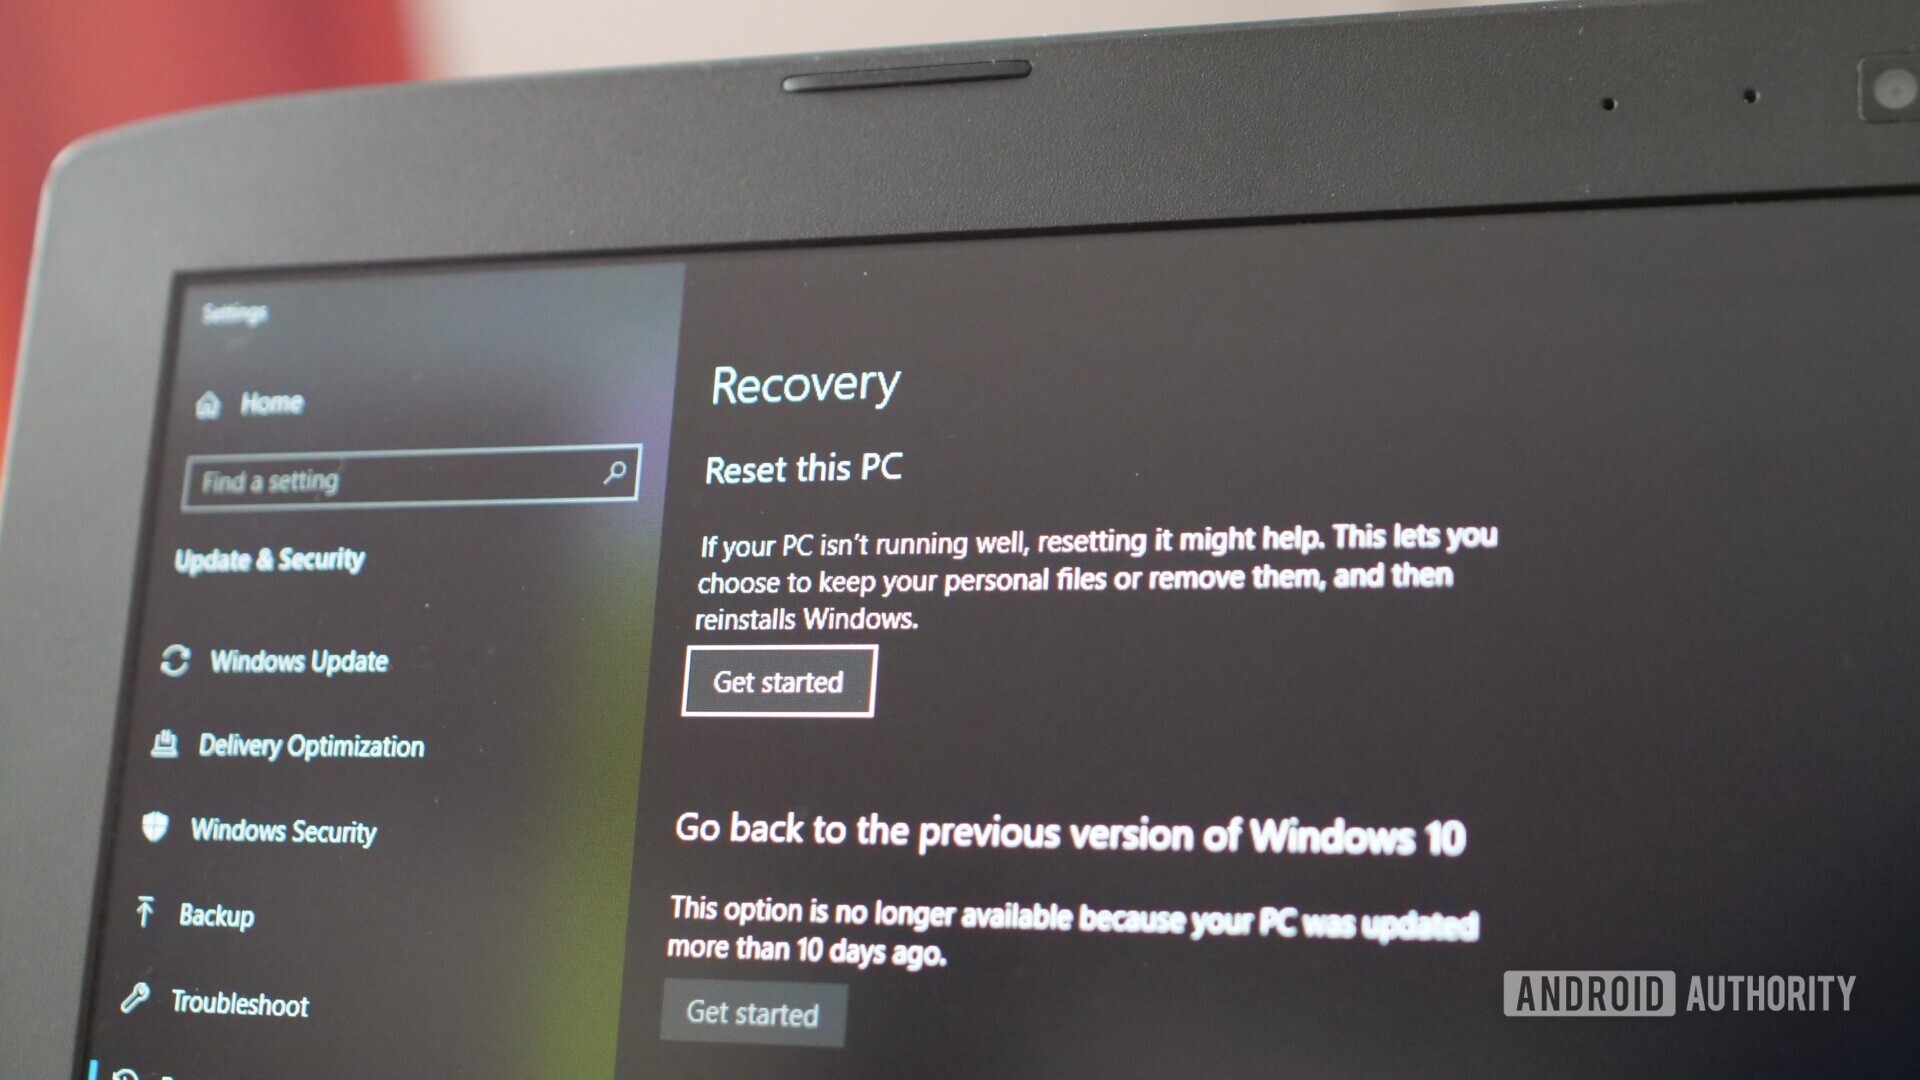 system recovery in Windows 10 on an asus laptop